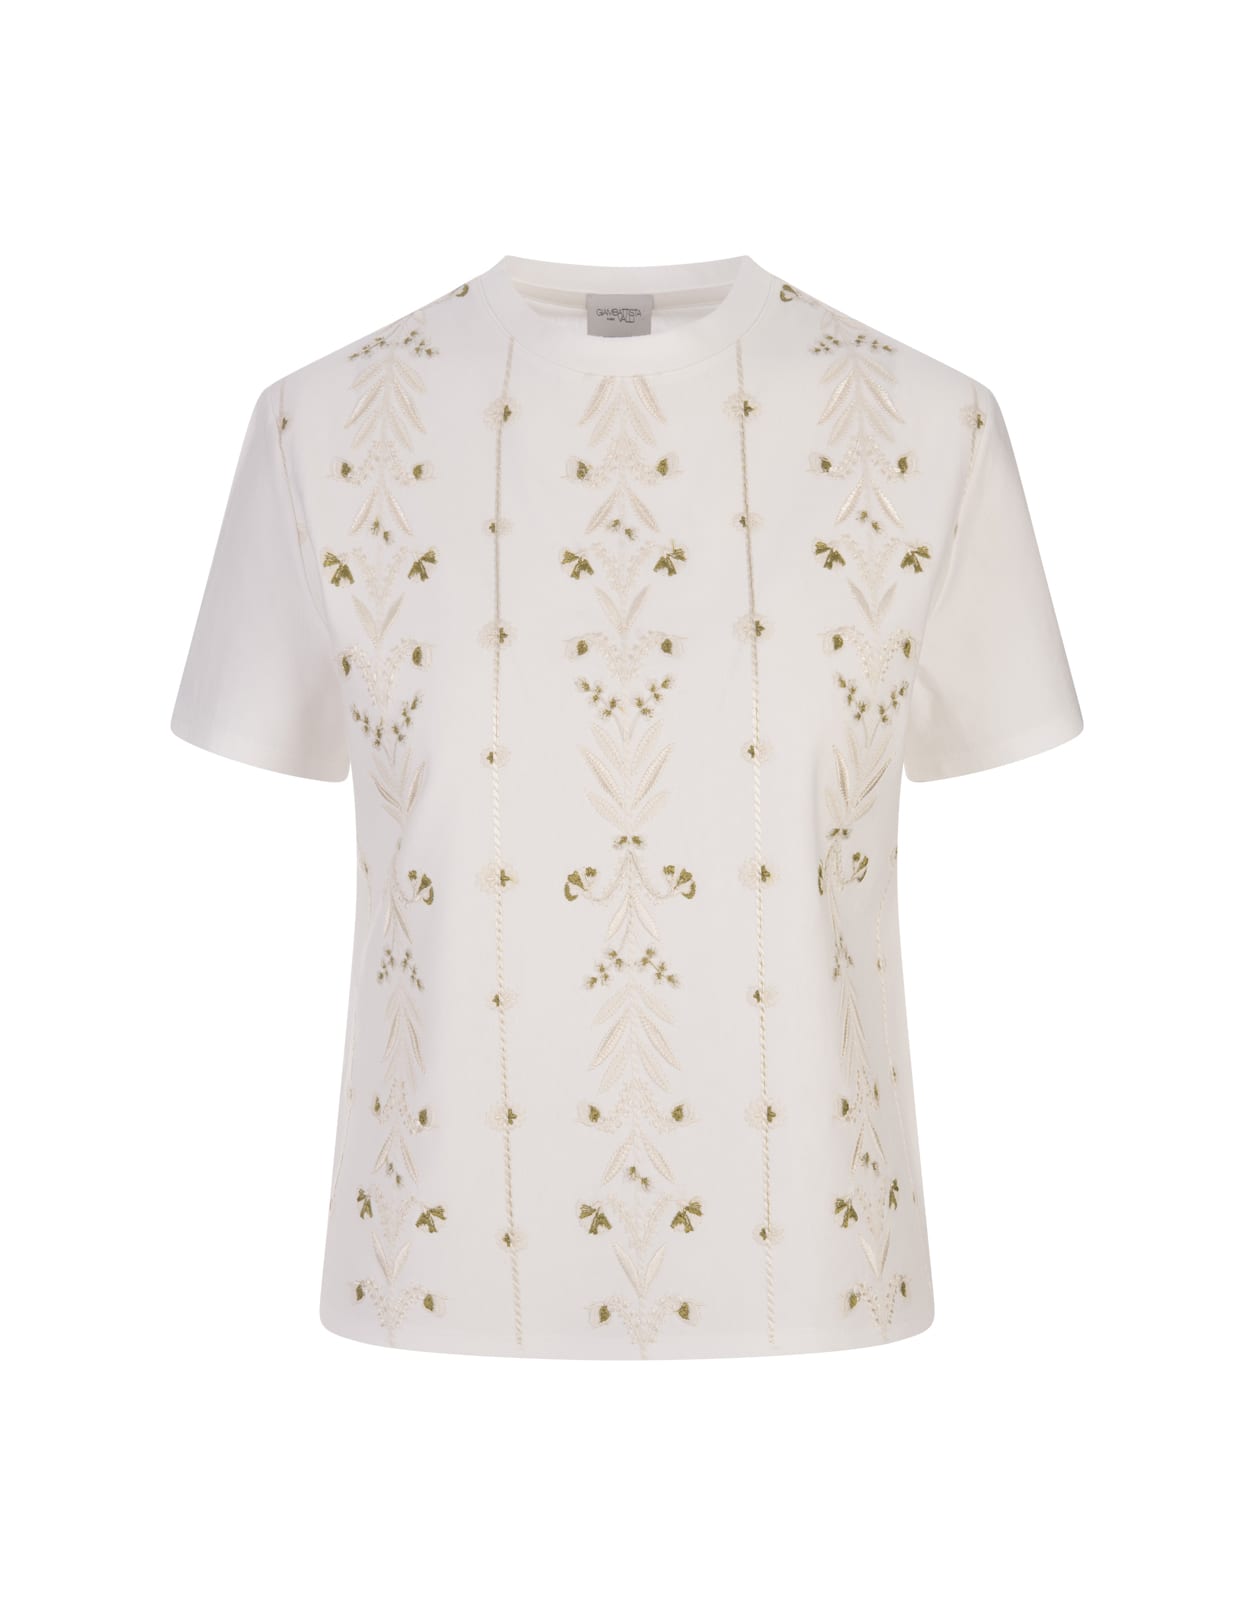 Embroidered Ivory T-shirt